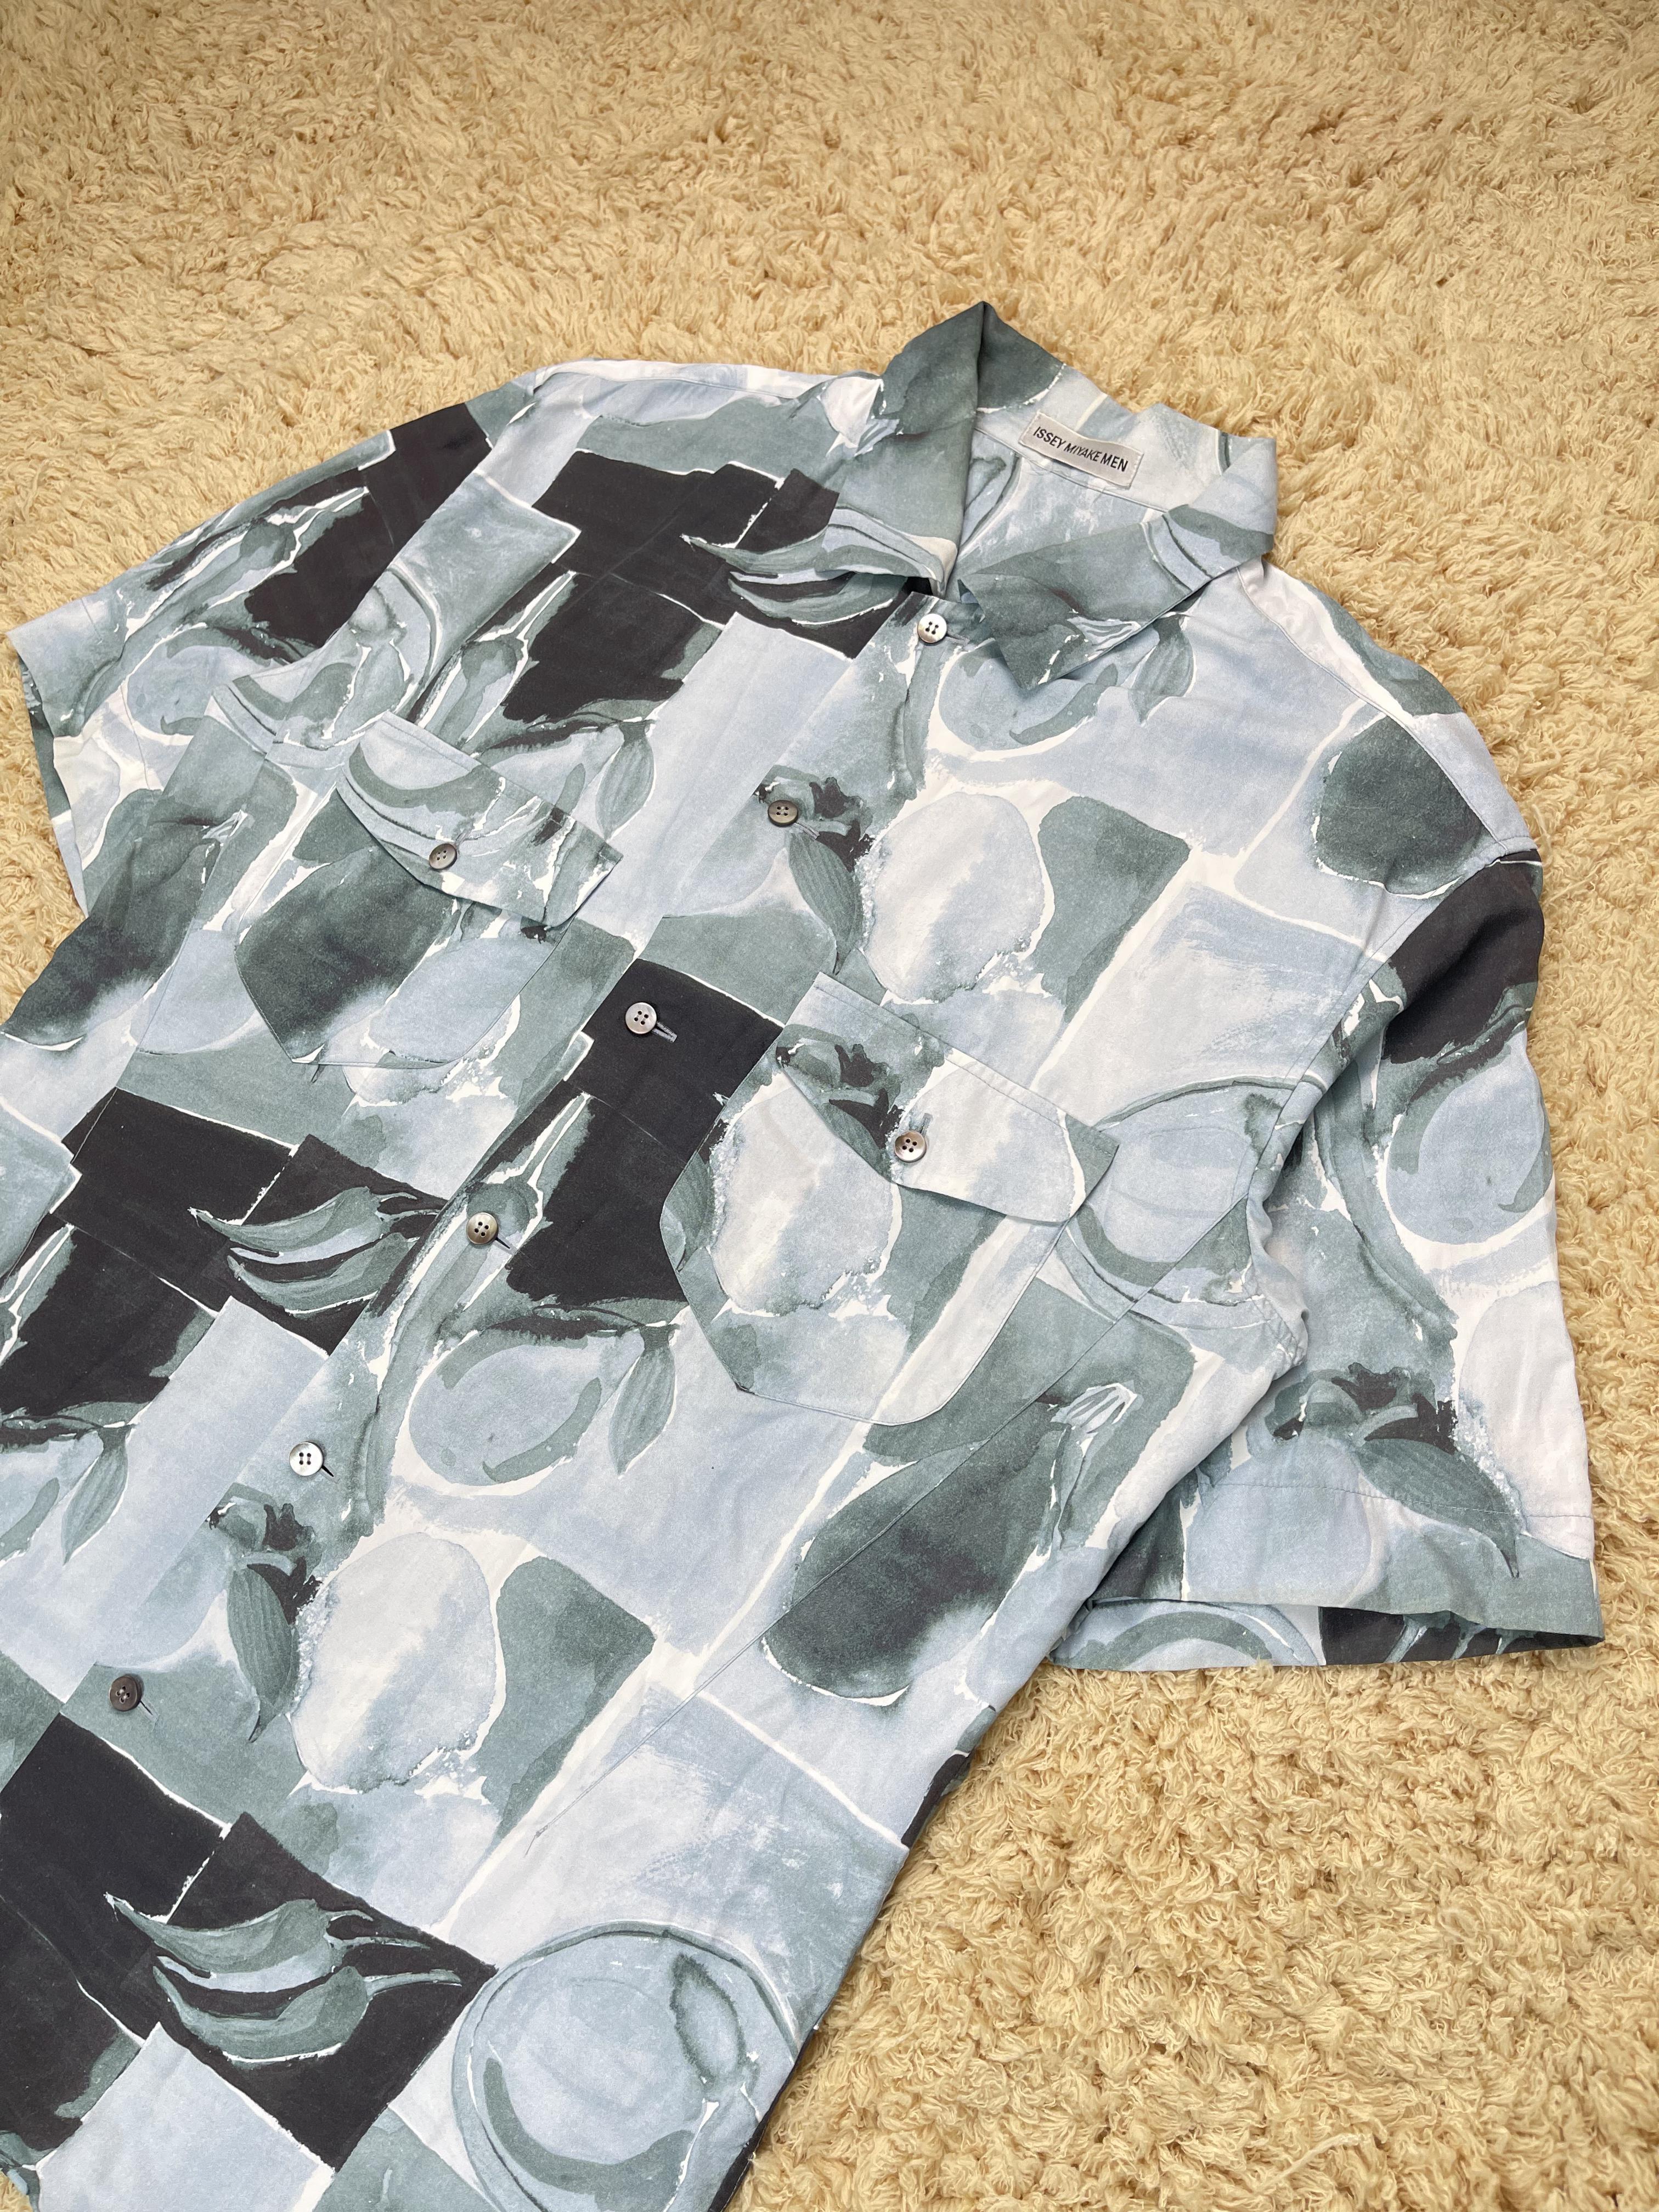 Vintage Issey Miyake shirt, the item is in decent condition with no overall stains, flaws or minor damages. Just has the washtag slightly faded.

Condition: 8/10. 

Size: XL, fits L - XL

For any questions regarding inquiries, please message us via